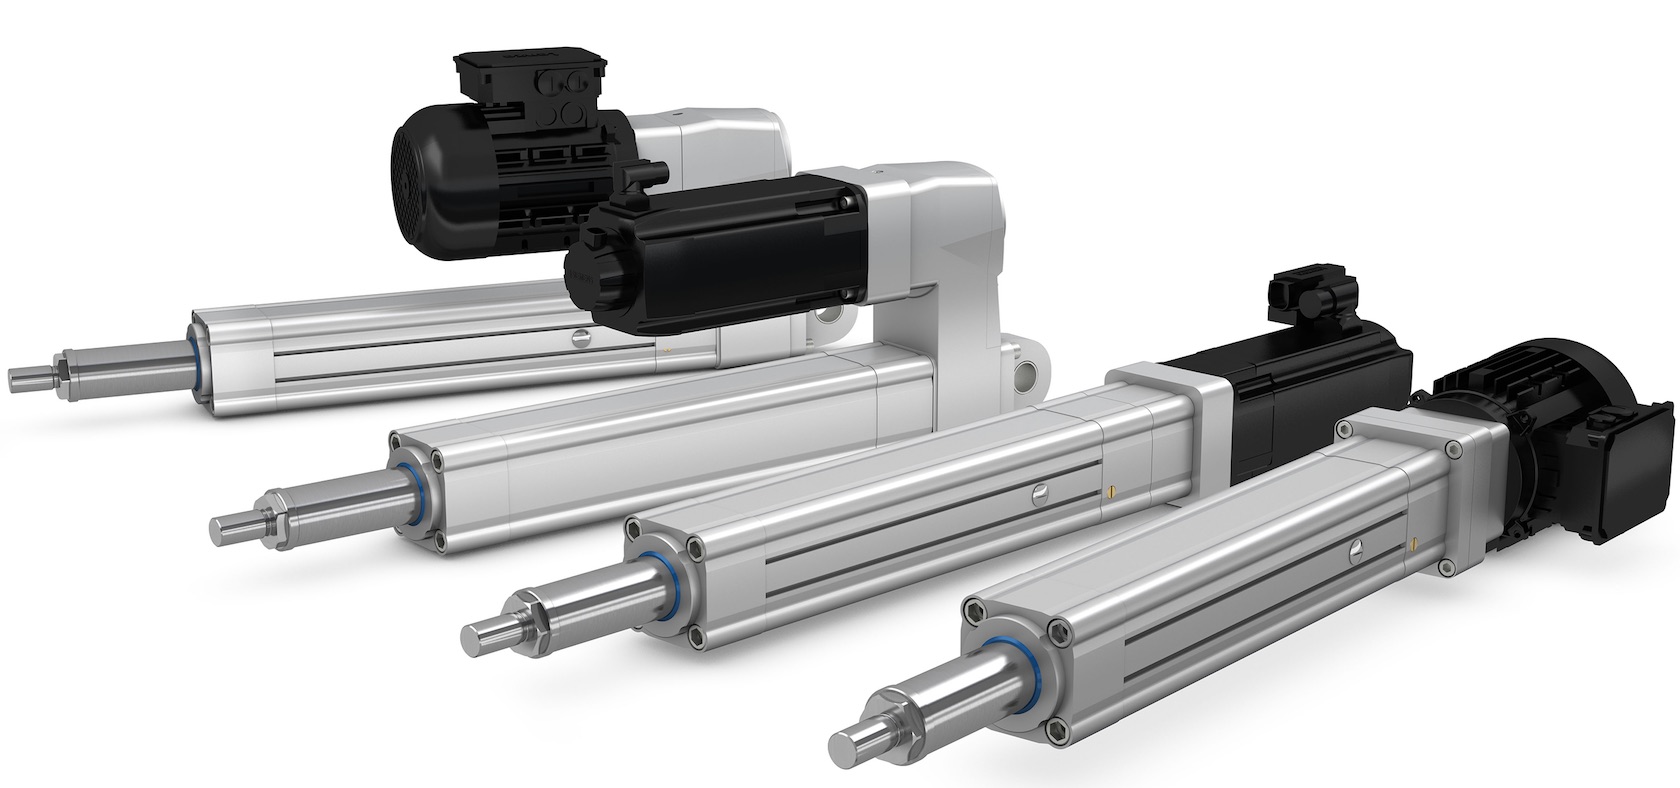 Ewellix launches new actuator reducing time and costs for car manufacturers